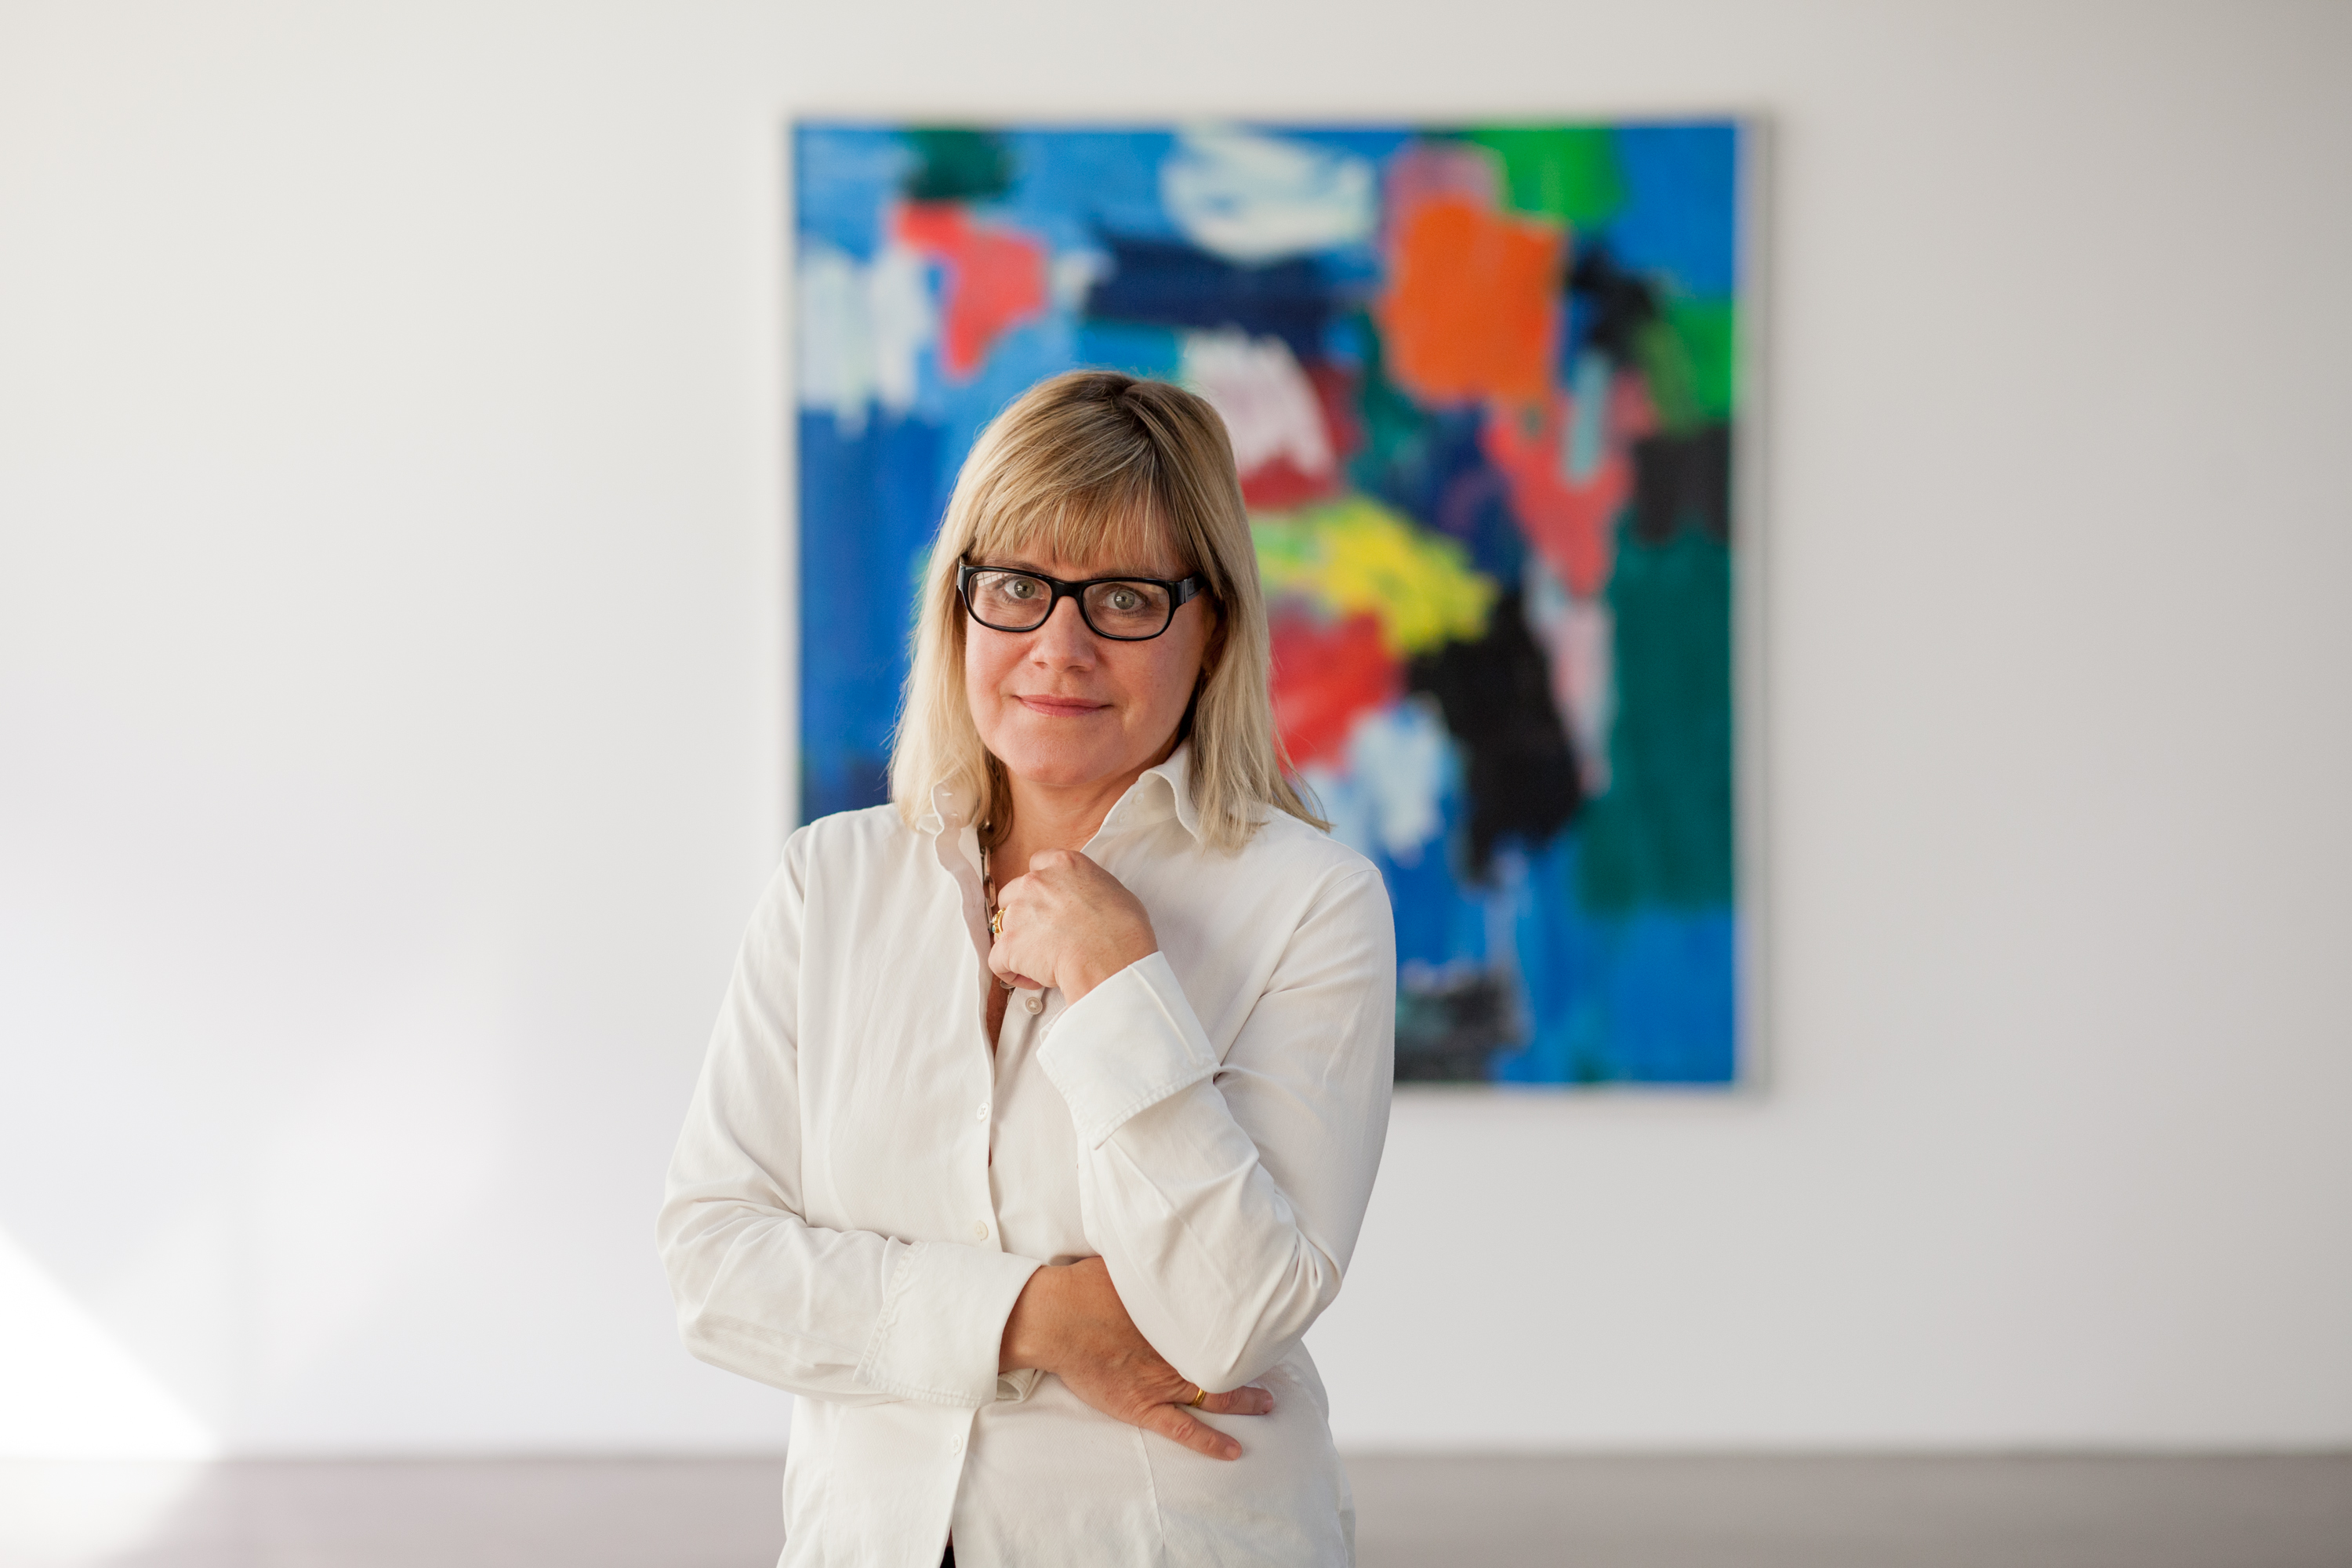 Anne-Marie Russell, New Executive Director for the Sarasota Museum of Art (SMOA)